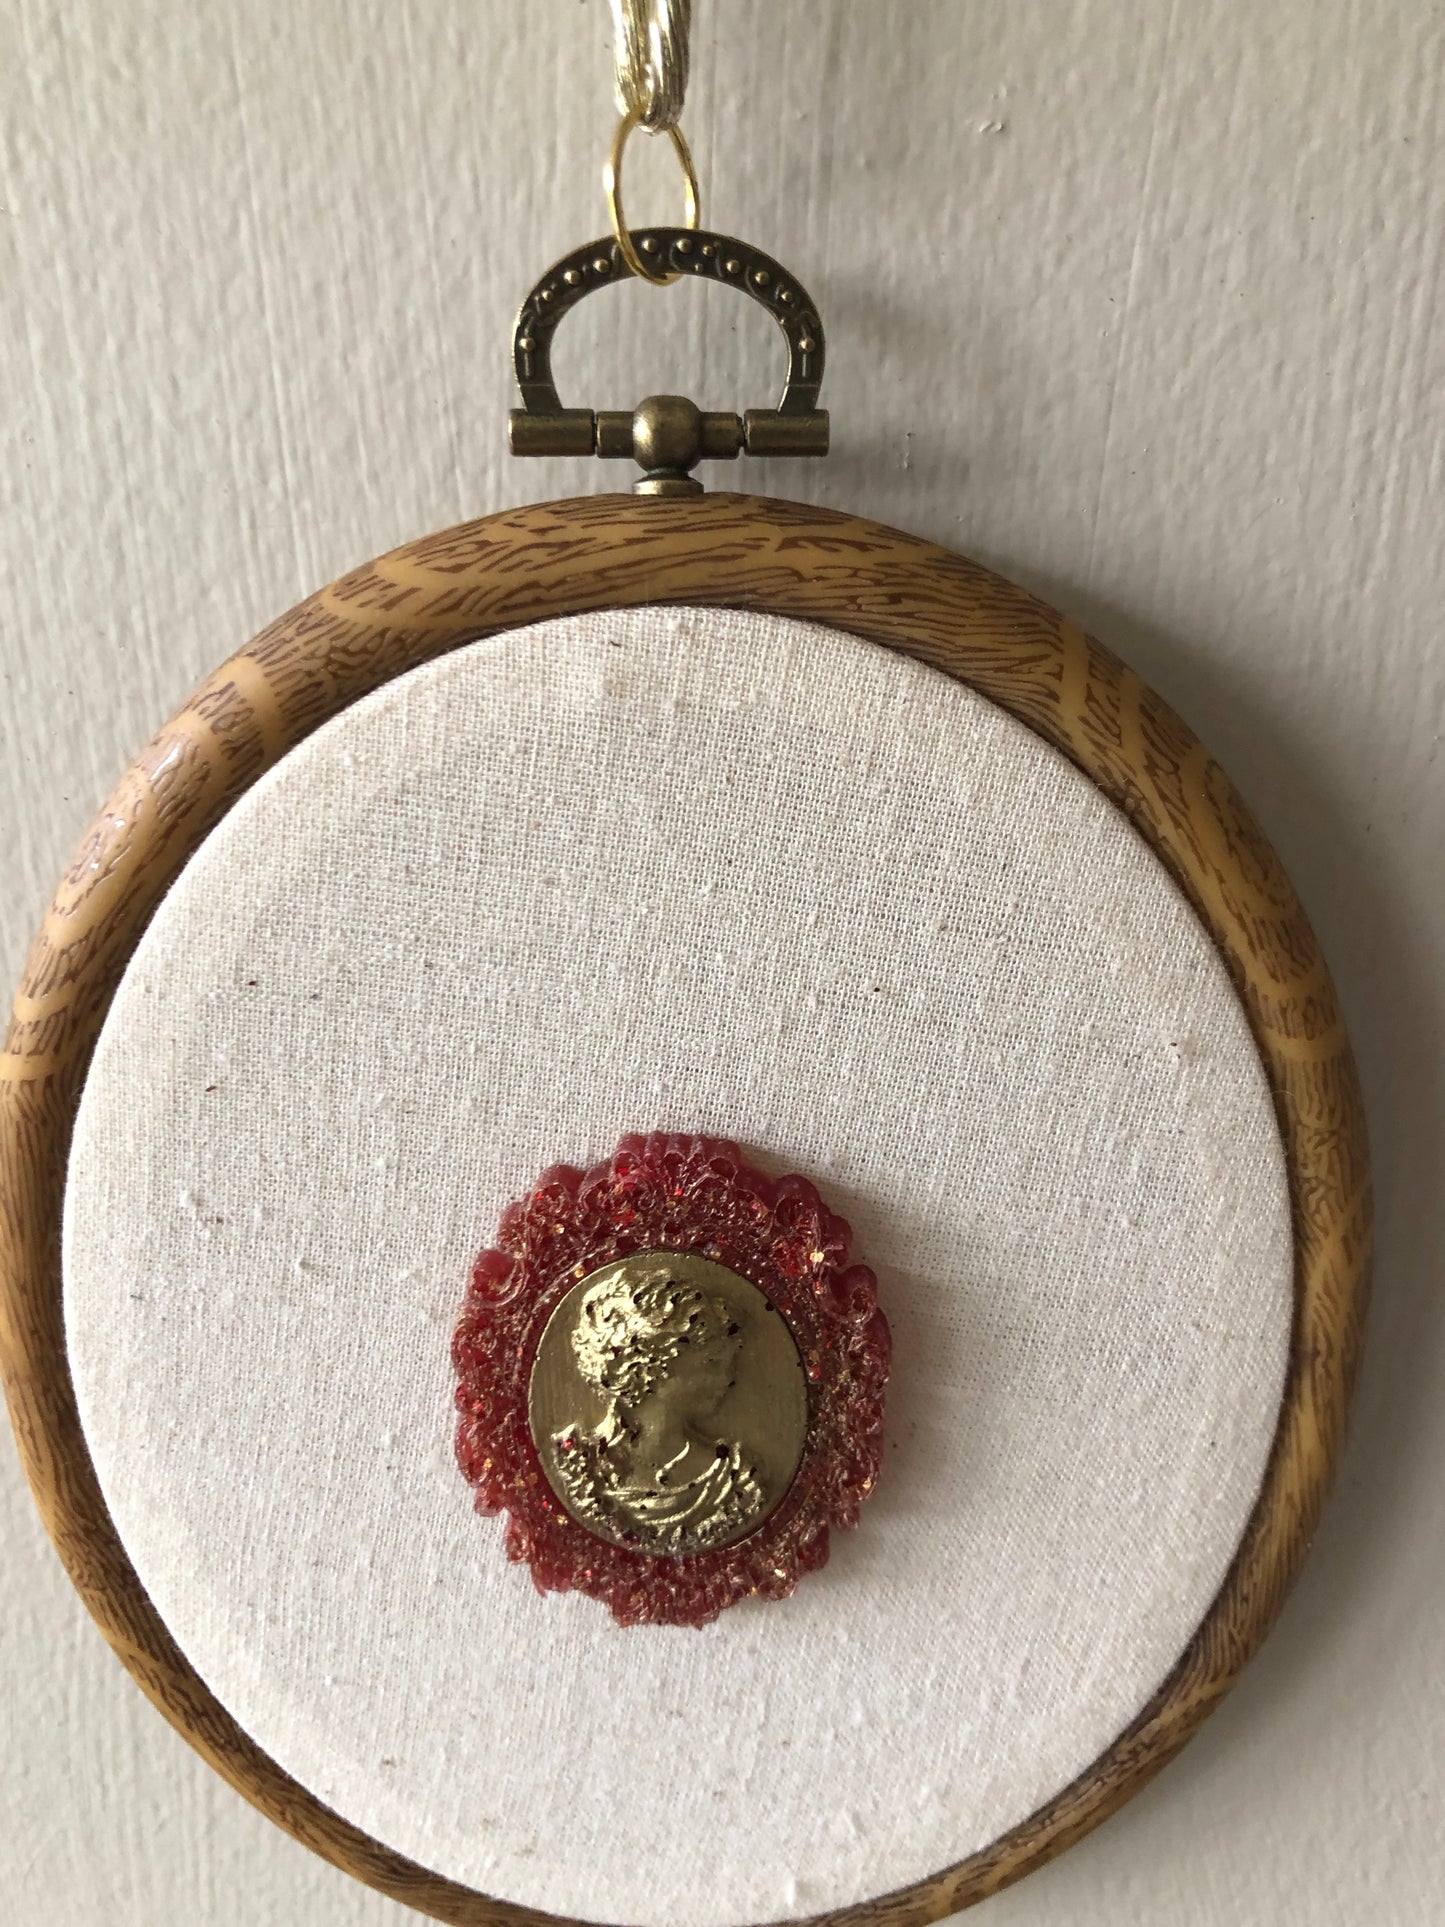 Cameo Pictures-Calico, resin & hoop ❤️